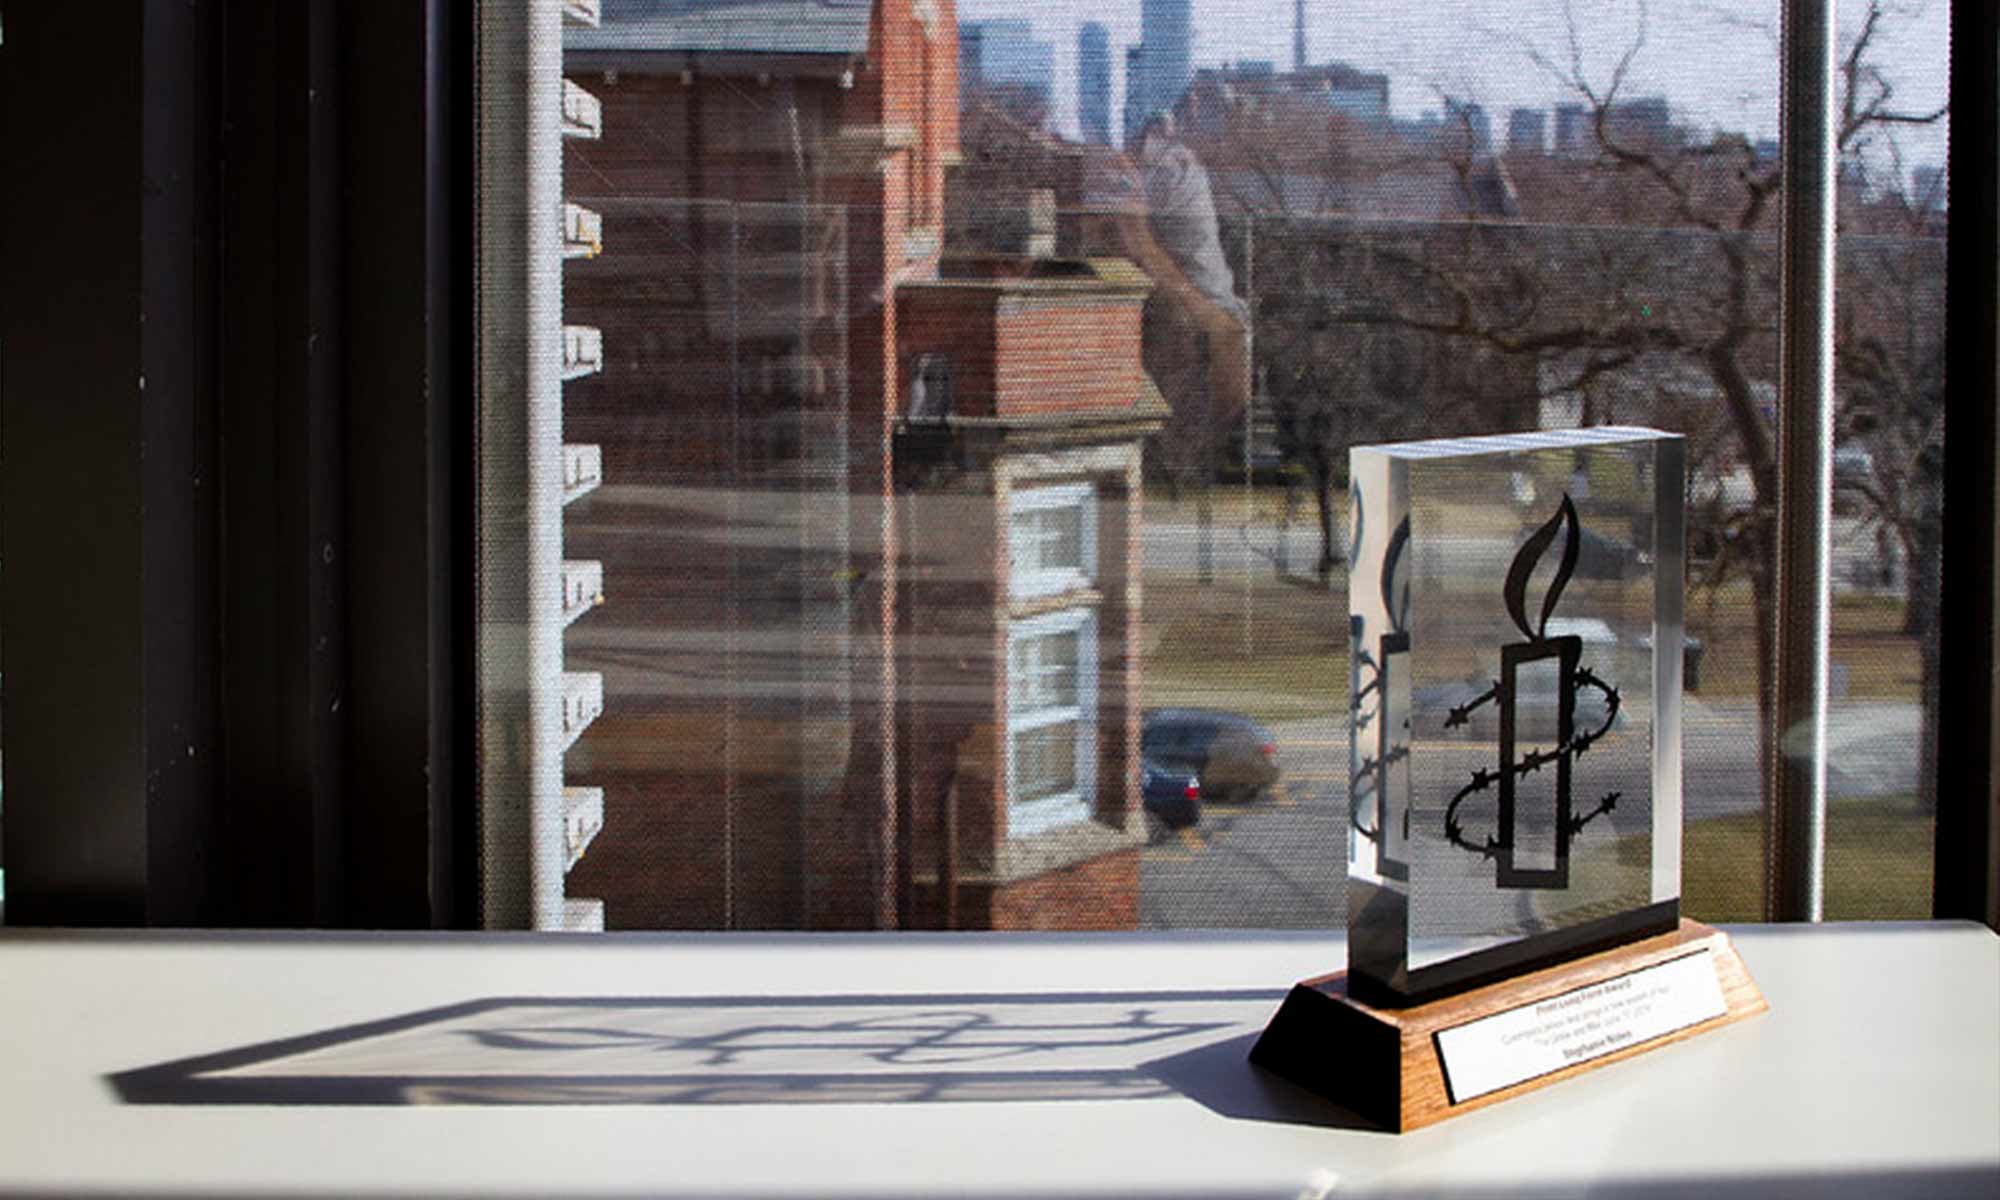 A square glass trophy with a wooden base sitting on a table in front of a window.